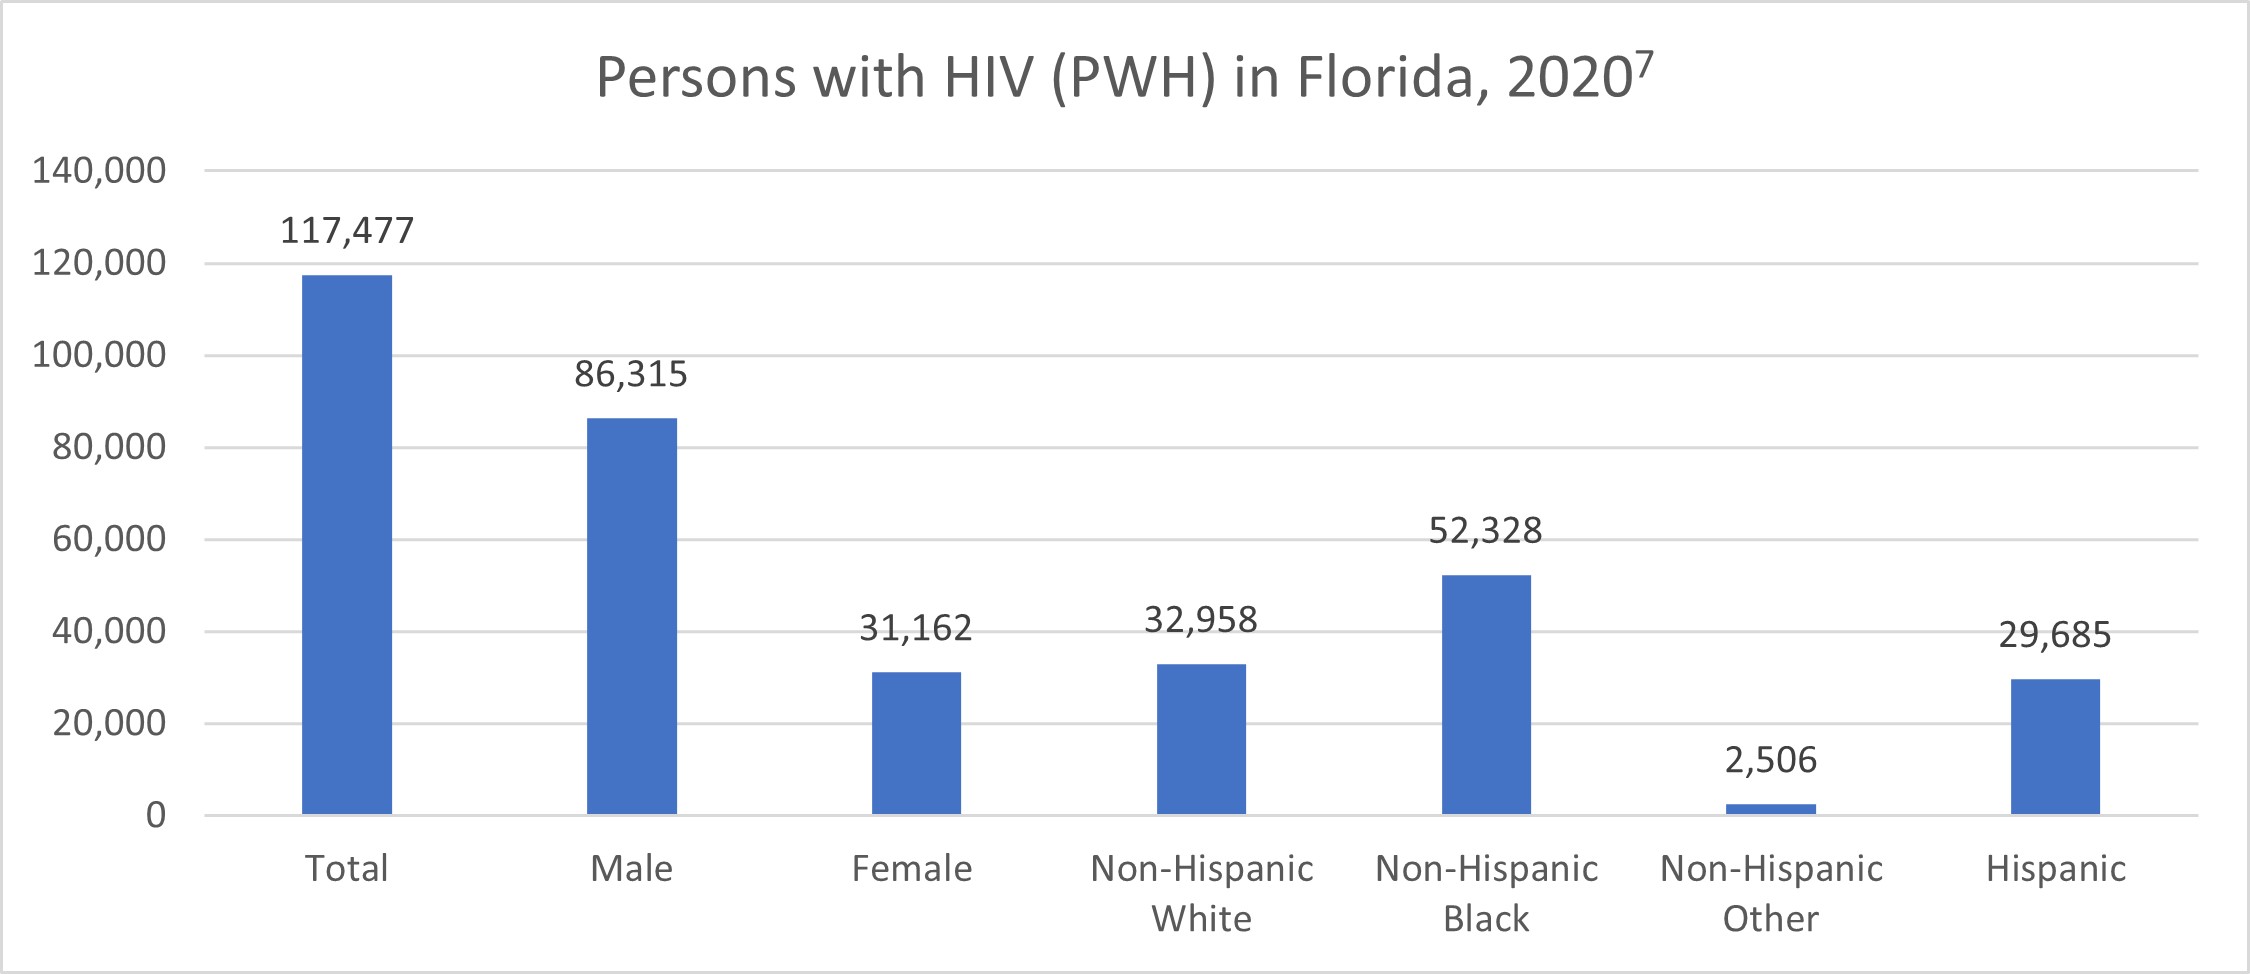 Persons with HIV (PWH) in Florida, 2020